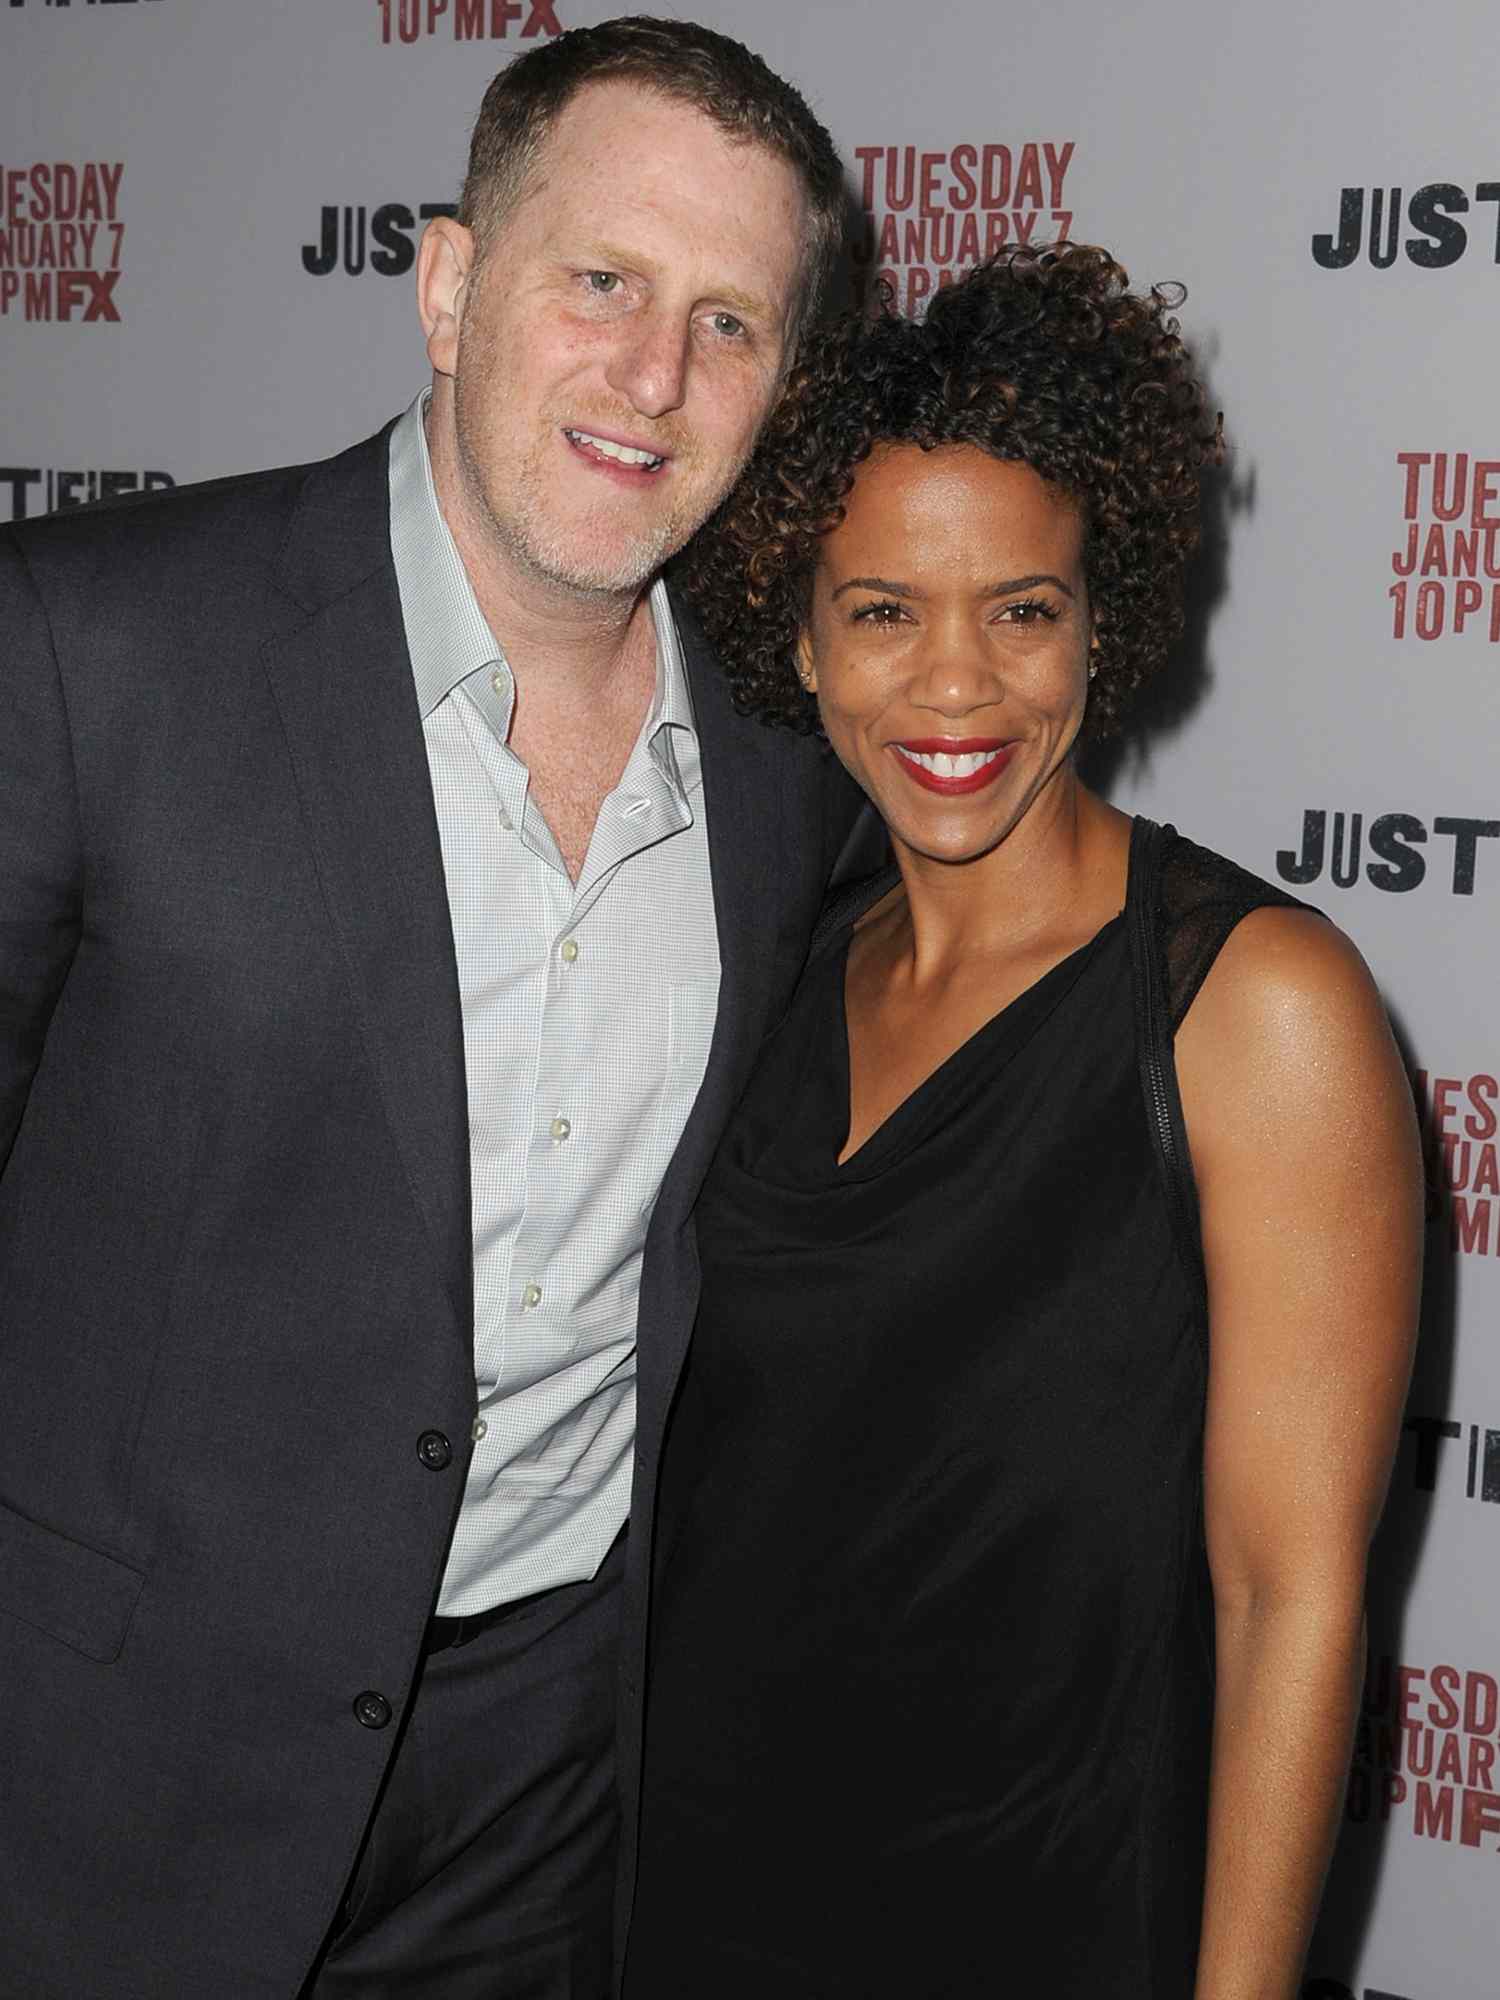 Michael Rapaport and Kebe Dunn attend the season 5 premiere screening of FX's "Justified" on on January 6, 2014 in Los Angeles, California. 